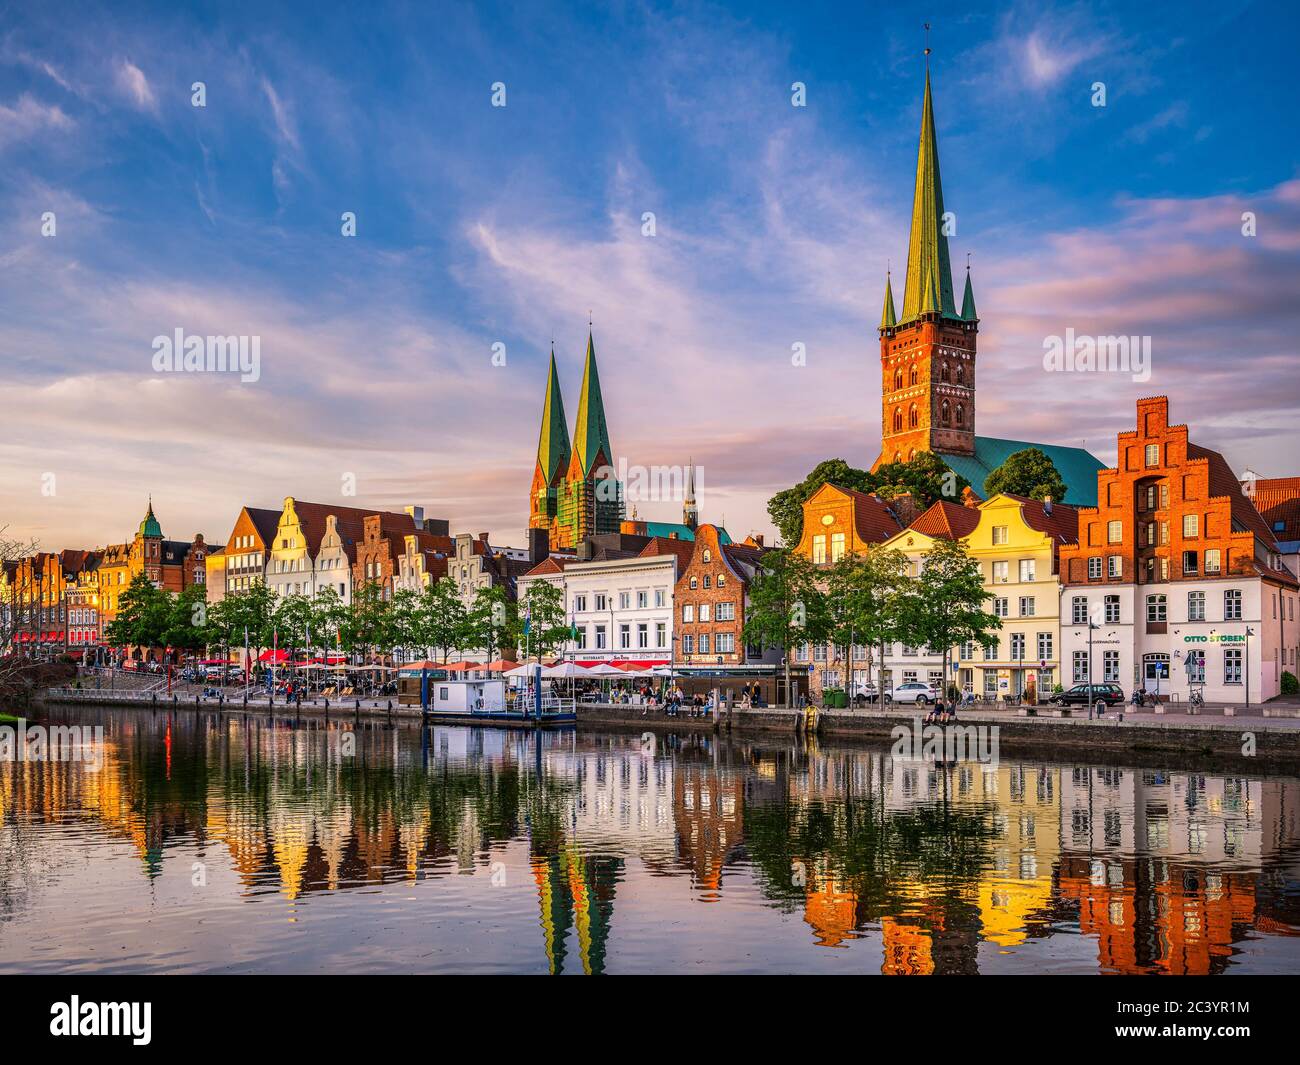 Old town of Lubeck, Germany during sunset Stock Photo